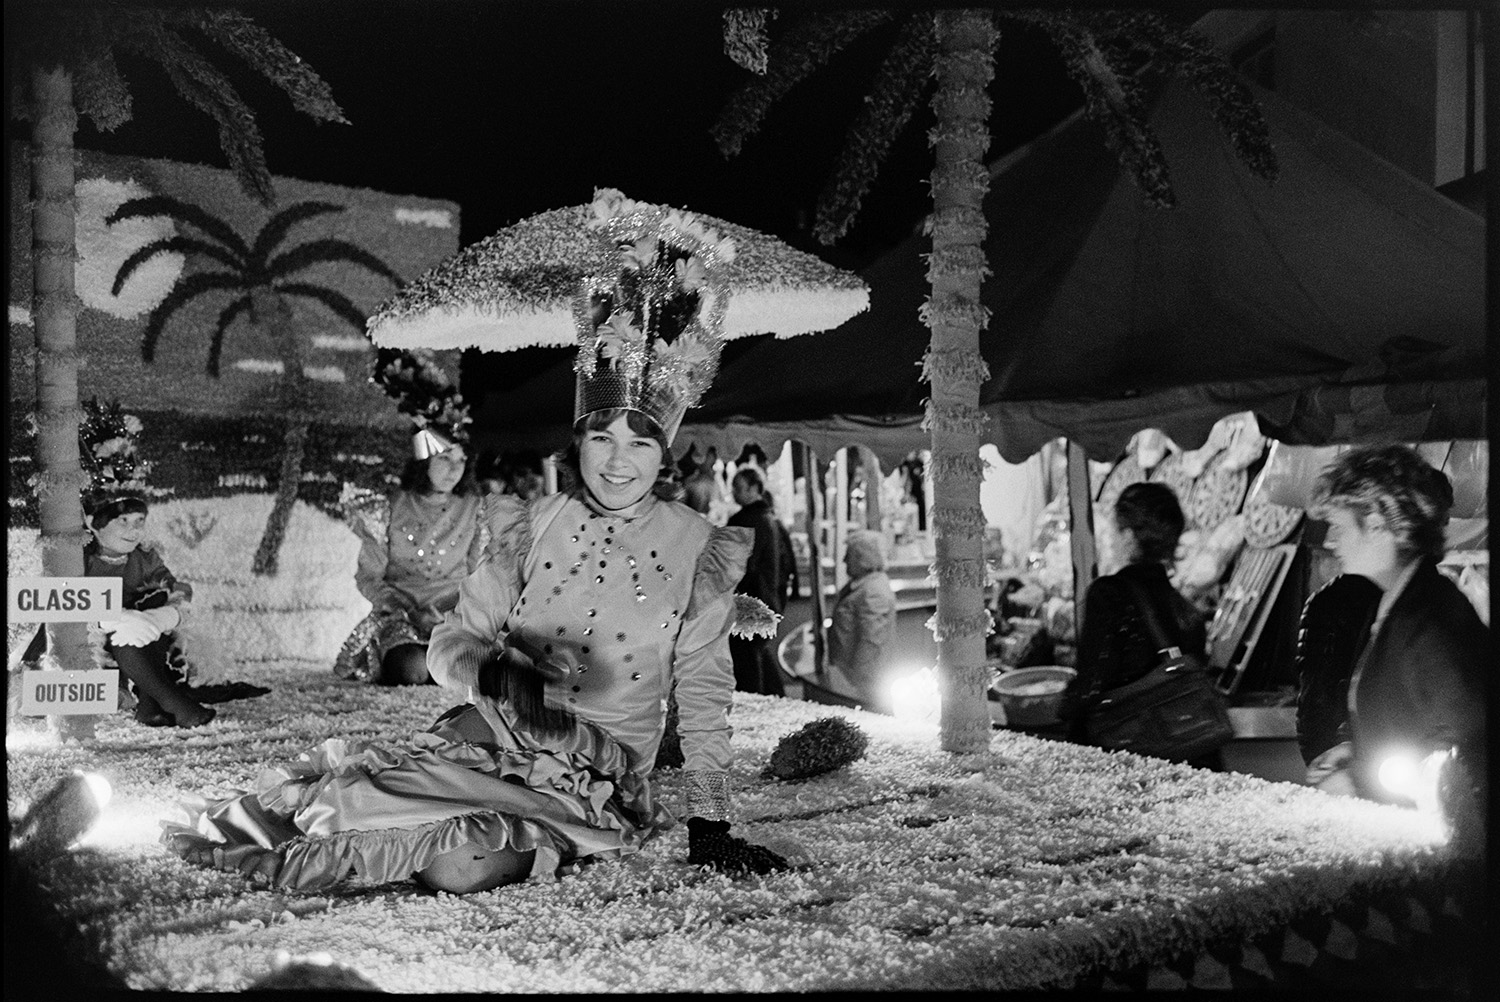 Girls, fancy dress on float at night. 
[Girls in fancy dress on a carnival float with palm trees in Dolton Carnival at night.]